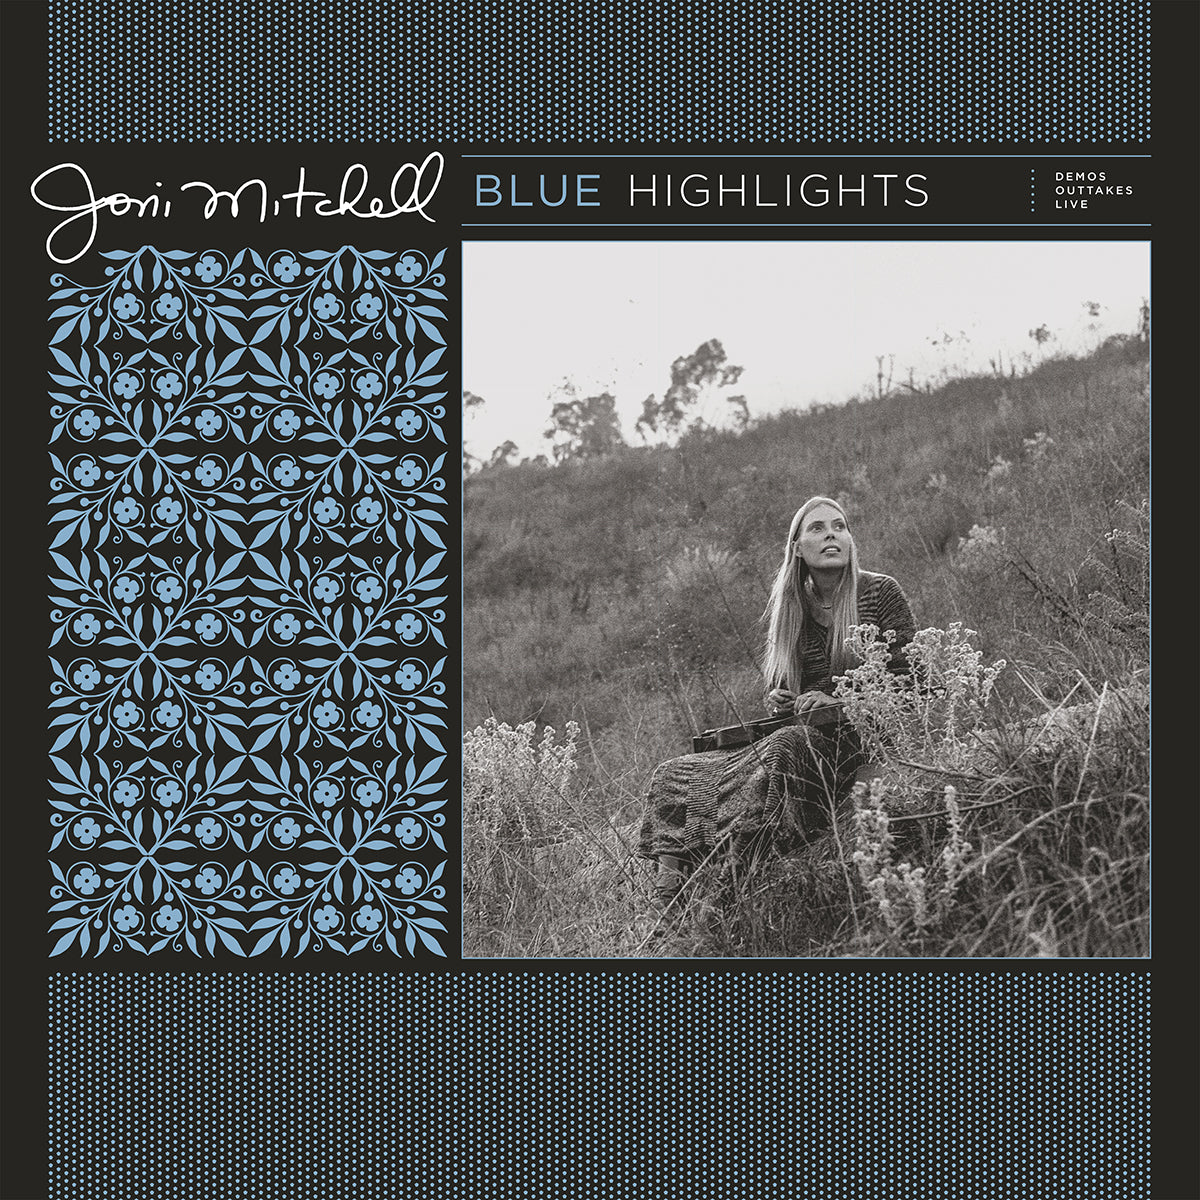 JONI MITCHELL - Blue 50: Demos, Outtakes And Live Tracks From Joni Mitchell Archives, Vol. 2 - LP - 180g Vinyl [RSD 2022]